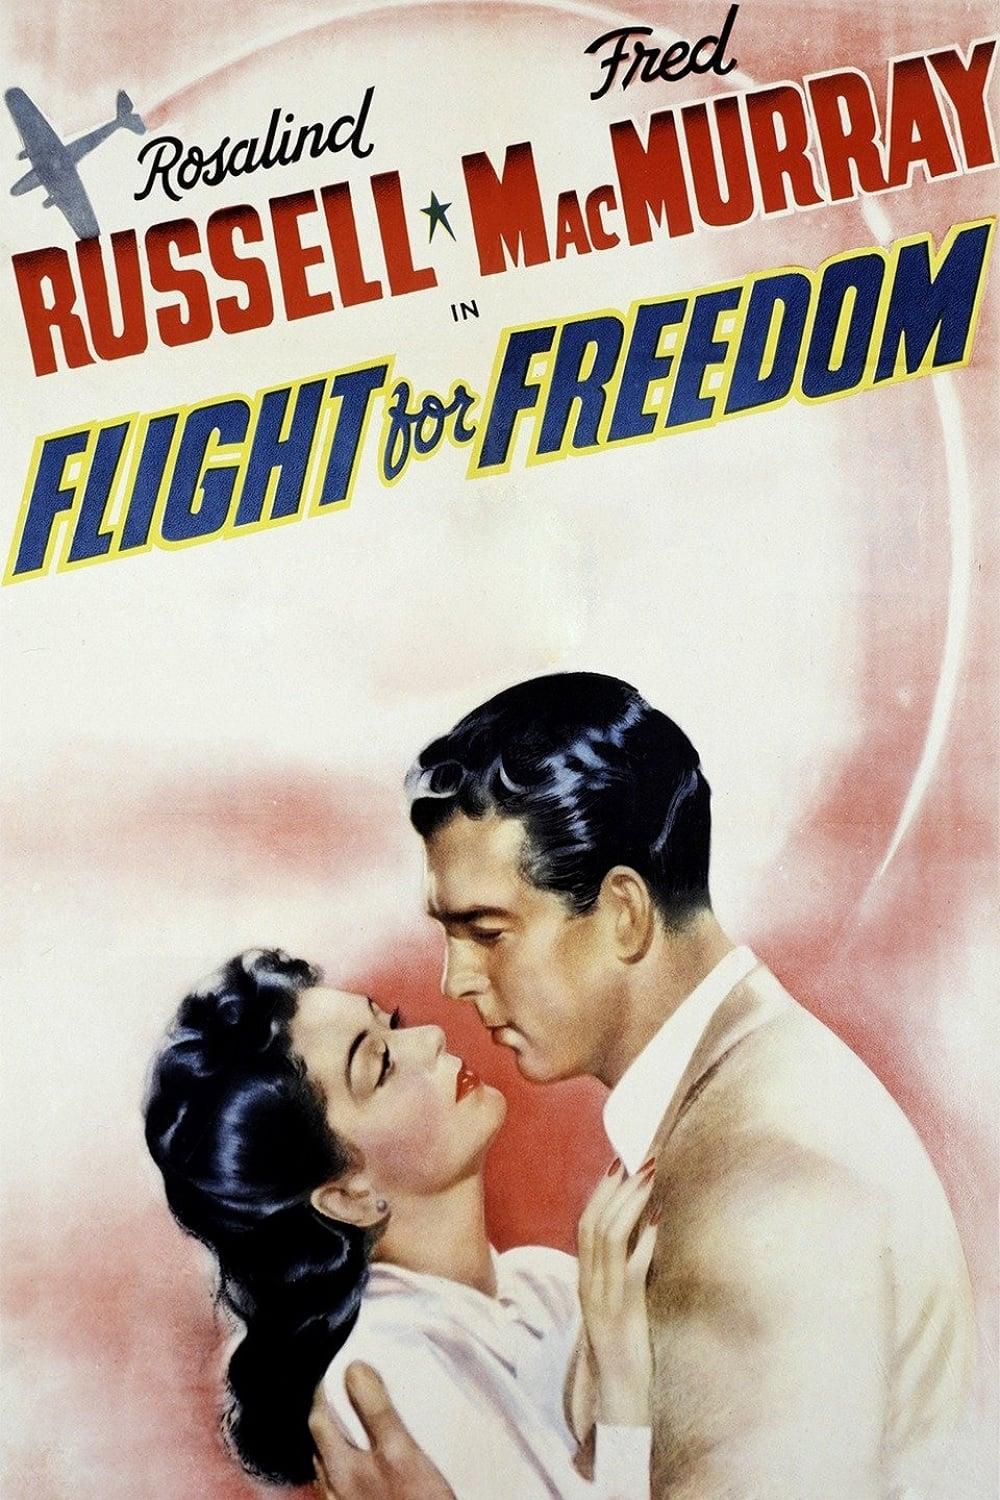 Flight for Freedom poster